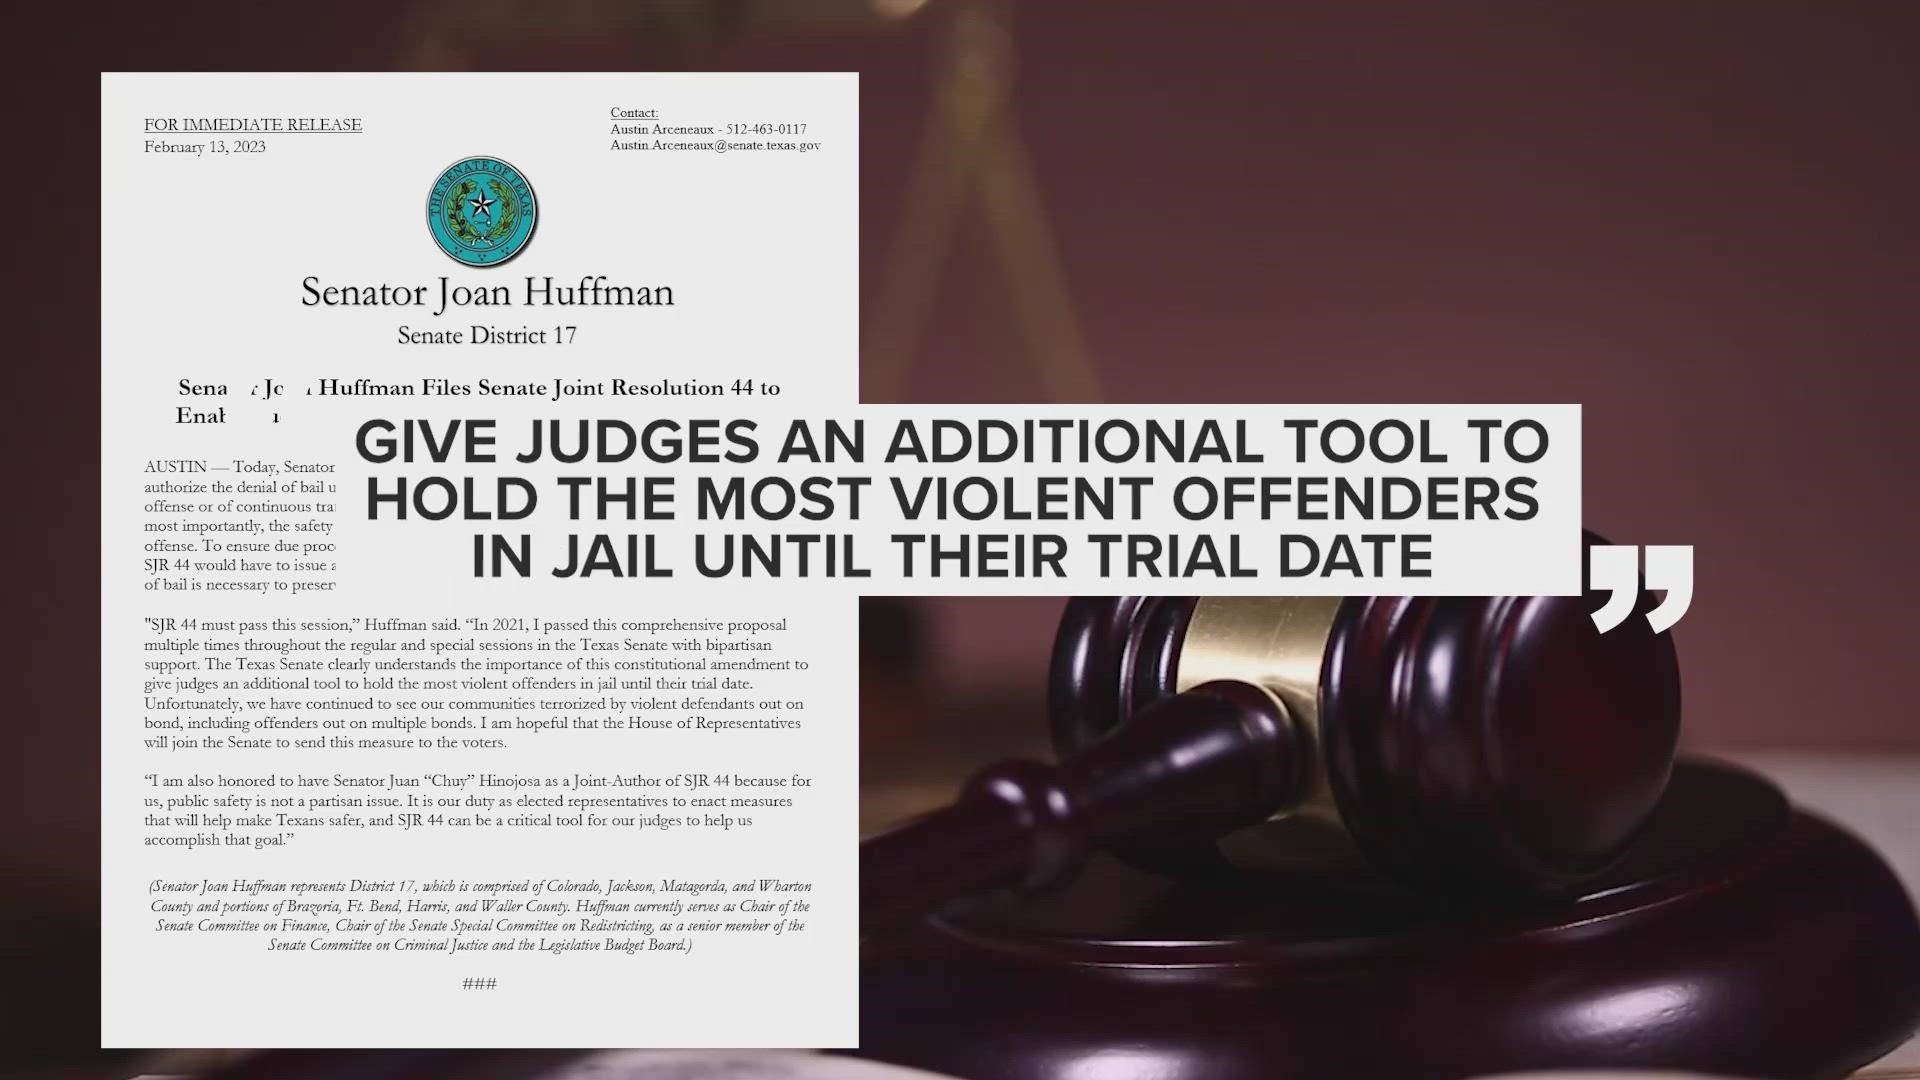 Sen. Joan Huffman said, in part, the amendment would "give judges an additional tool to hold the most violent offenders in jail until their trial date."